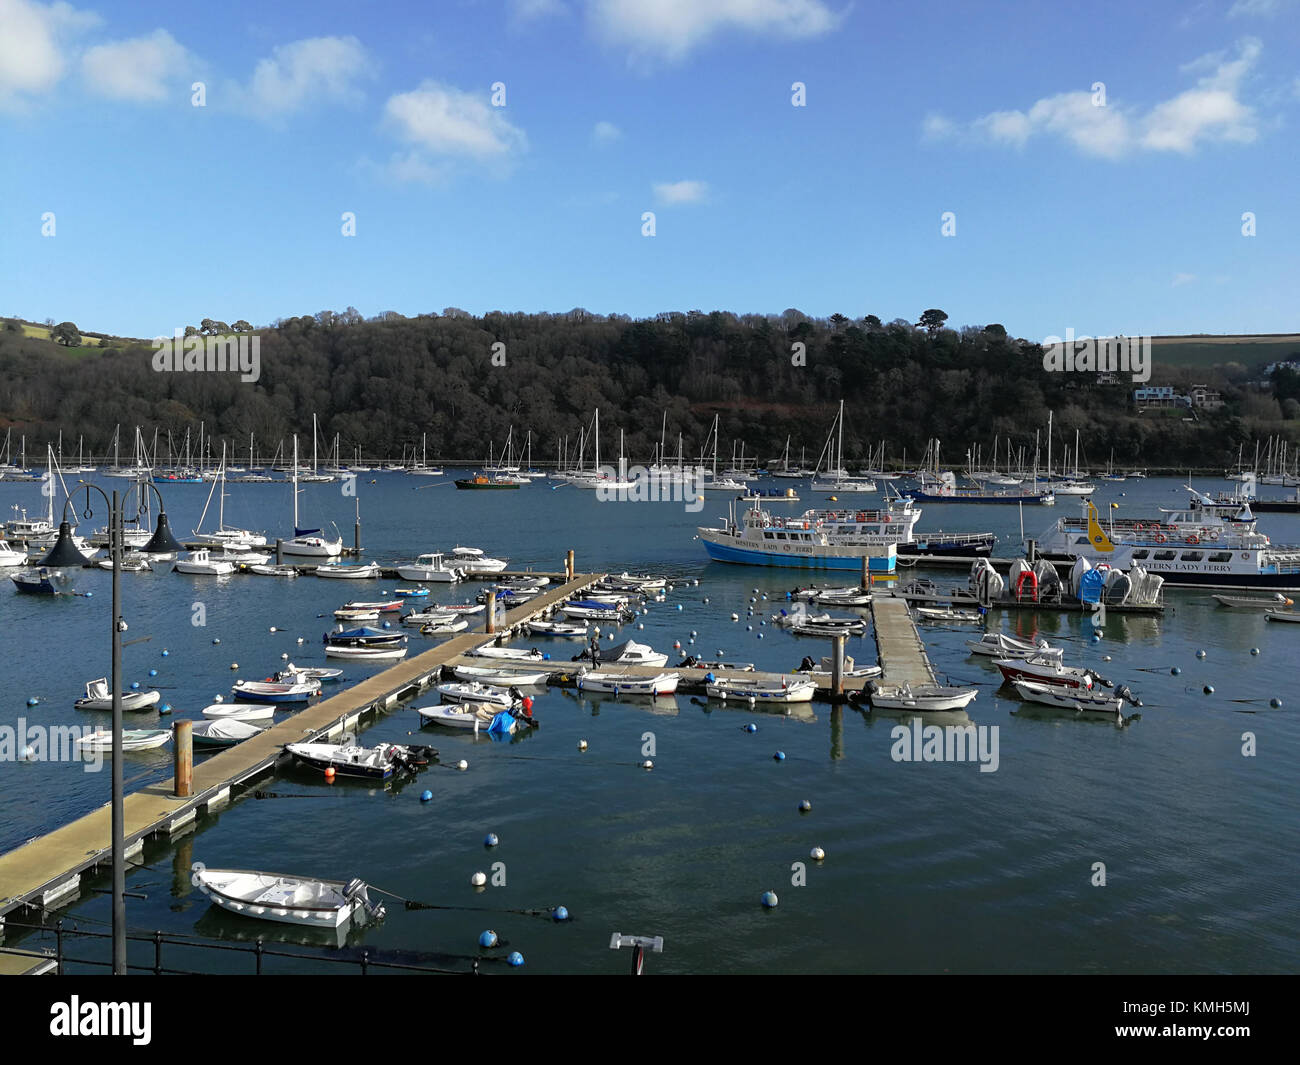 Dartmouth, 10th Dec 17 With the rest of the UK suffering freezing temperatures, the South West was the exception, with double figure temperatures across most of Devon. The riverbank at Dartmouth basked in glorious sunshine for most of the day. Photo Central/Alamy Live News Stock Photo